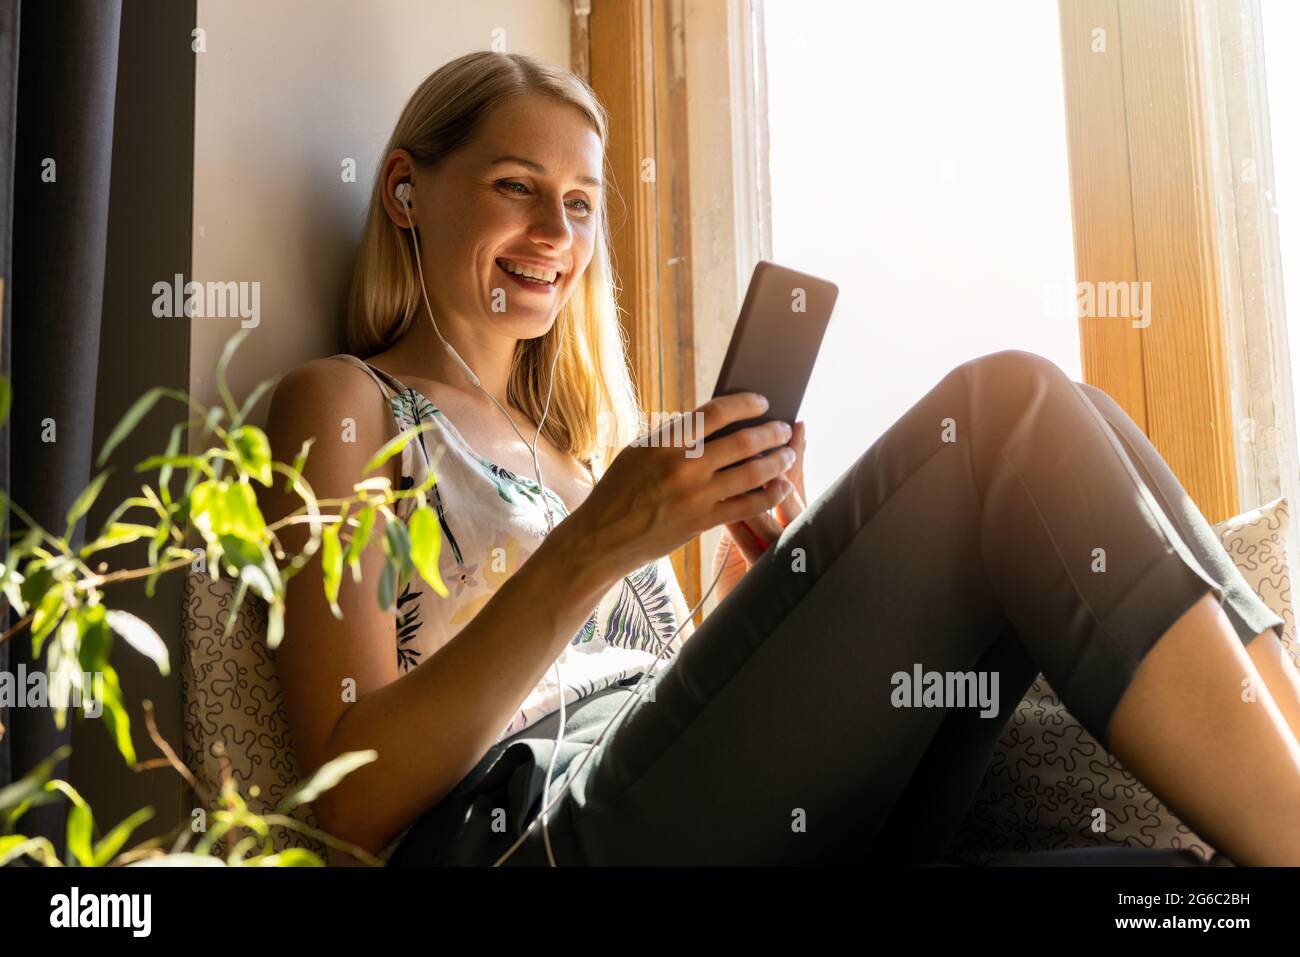 smiling young woman sitting on sunny window sill and using smartphone at home Stock Photo